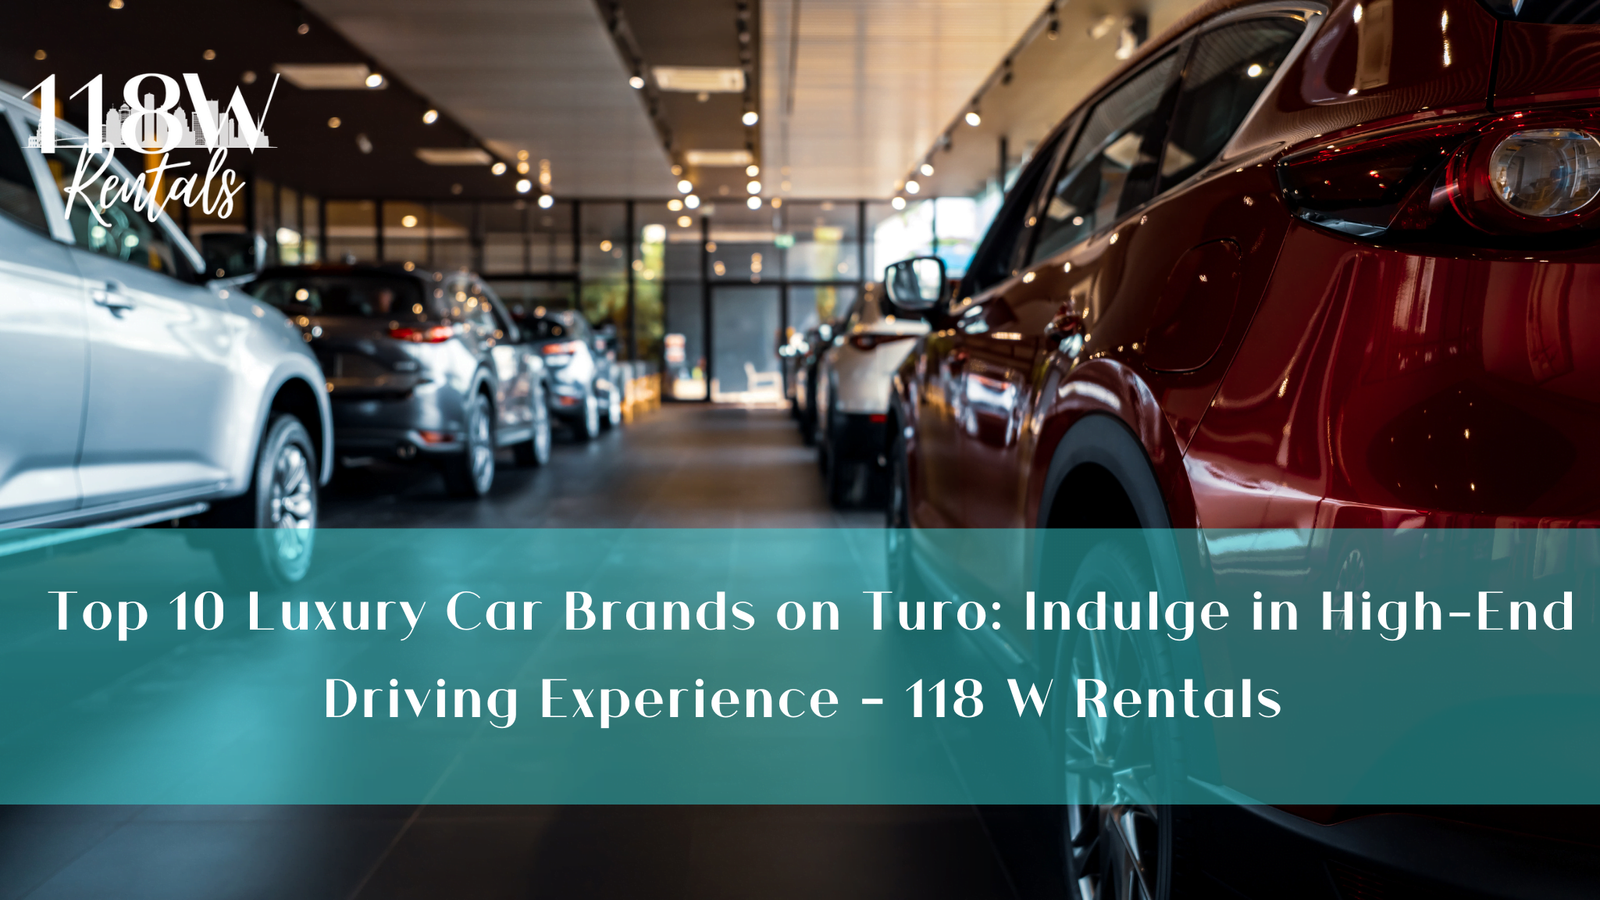 Top 10 Luxury Car Brands on Turo: Indulge in High-End Driving Experience – 118 W Rentals